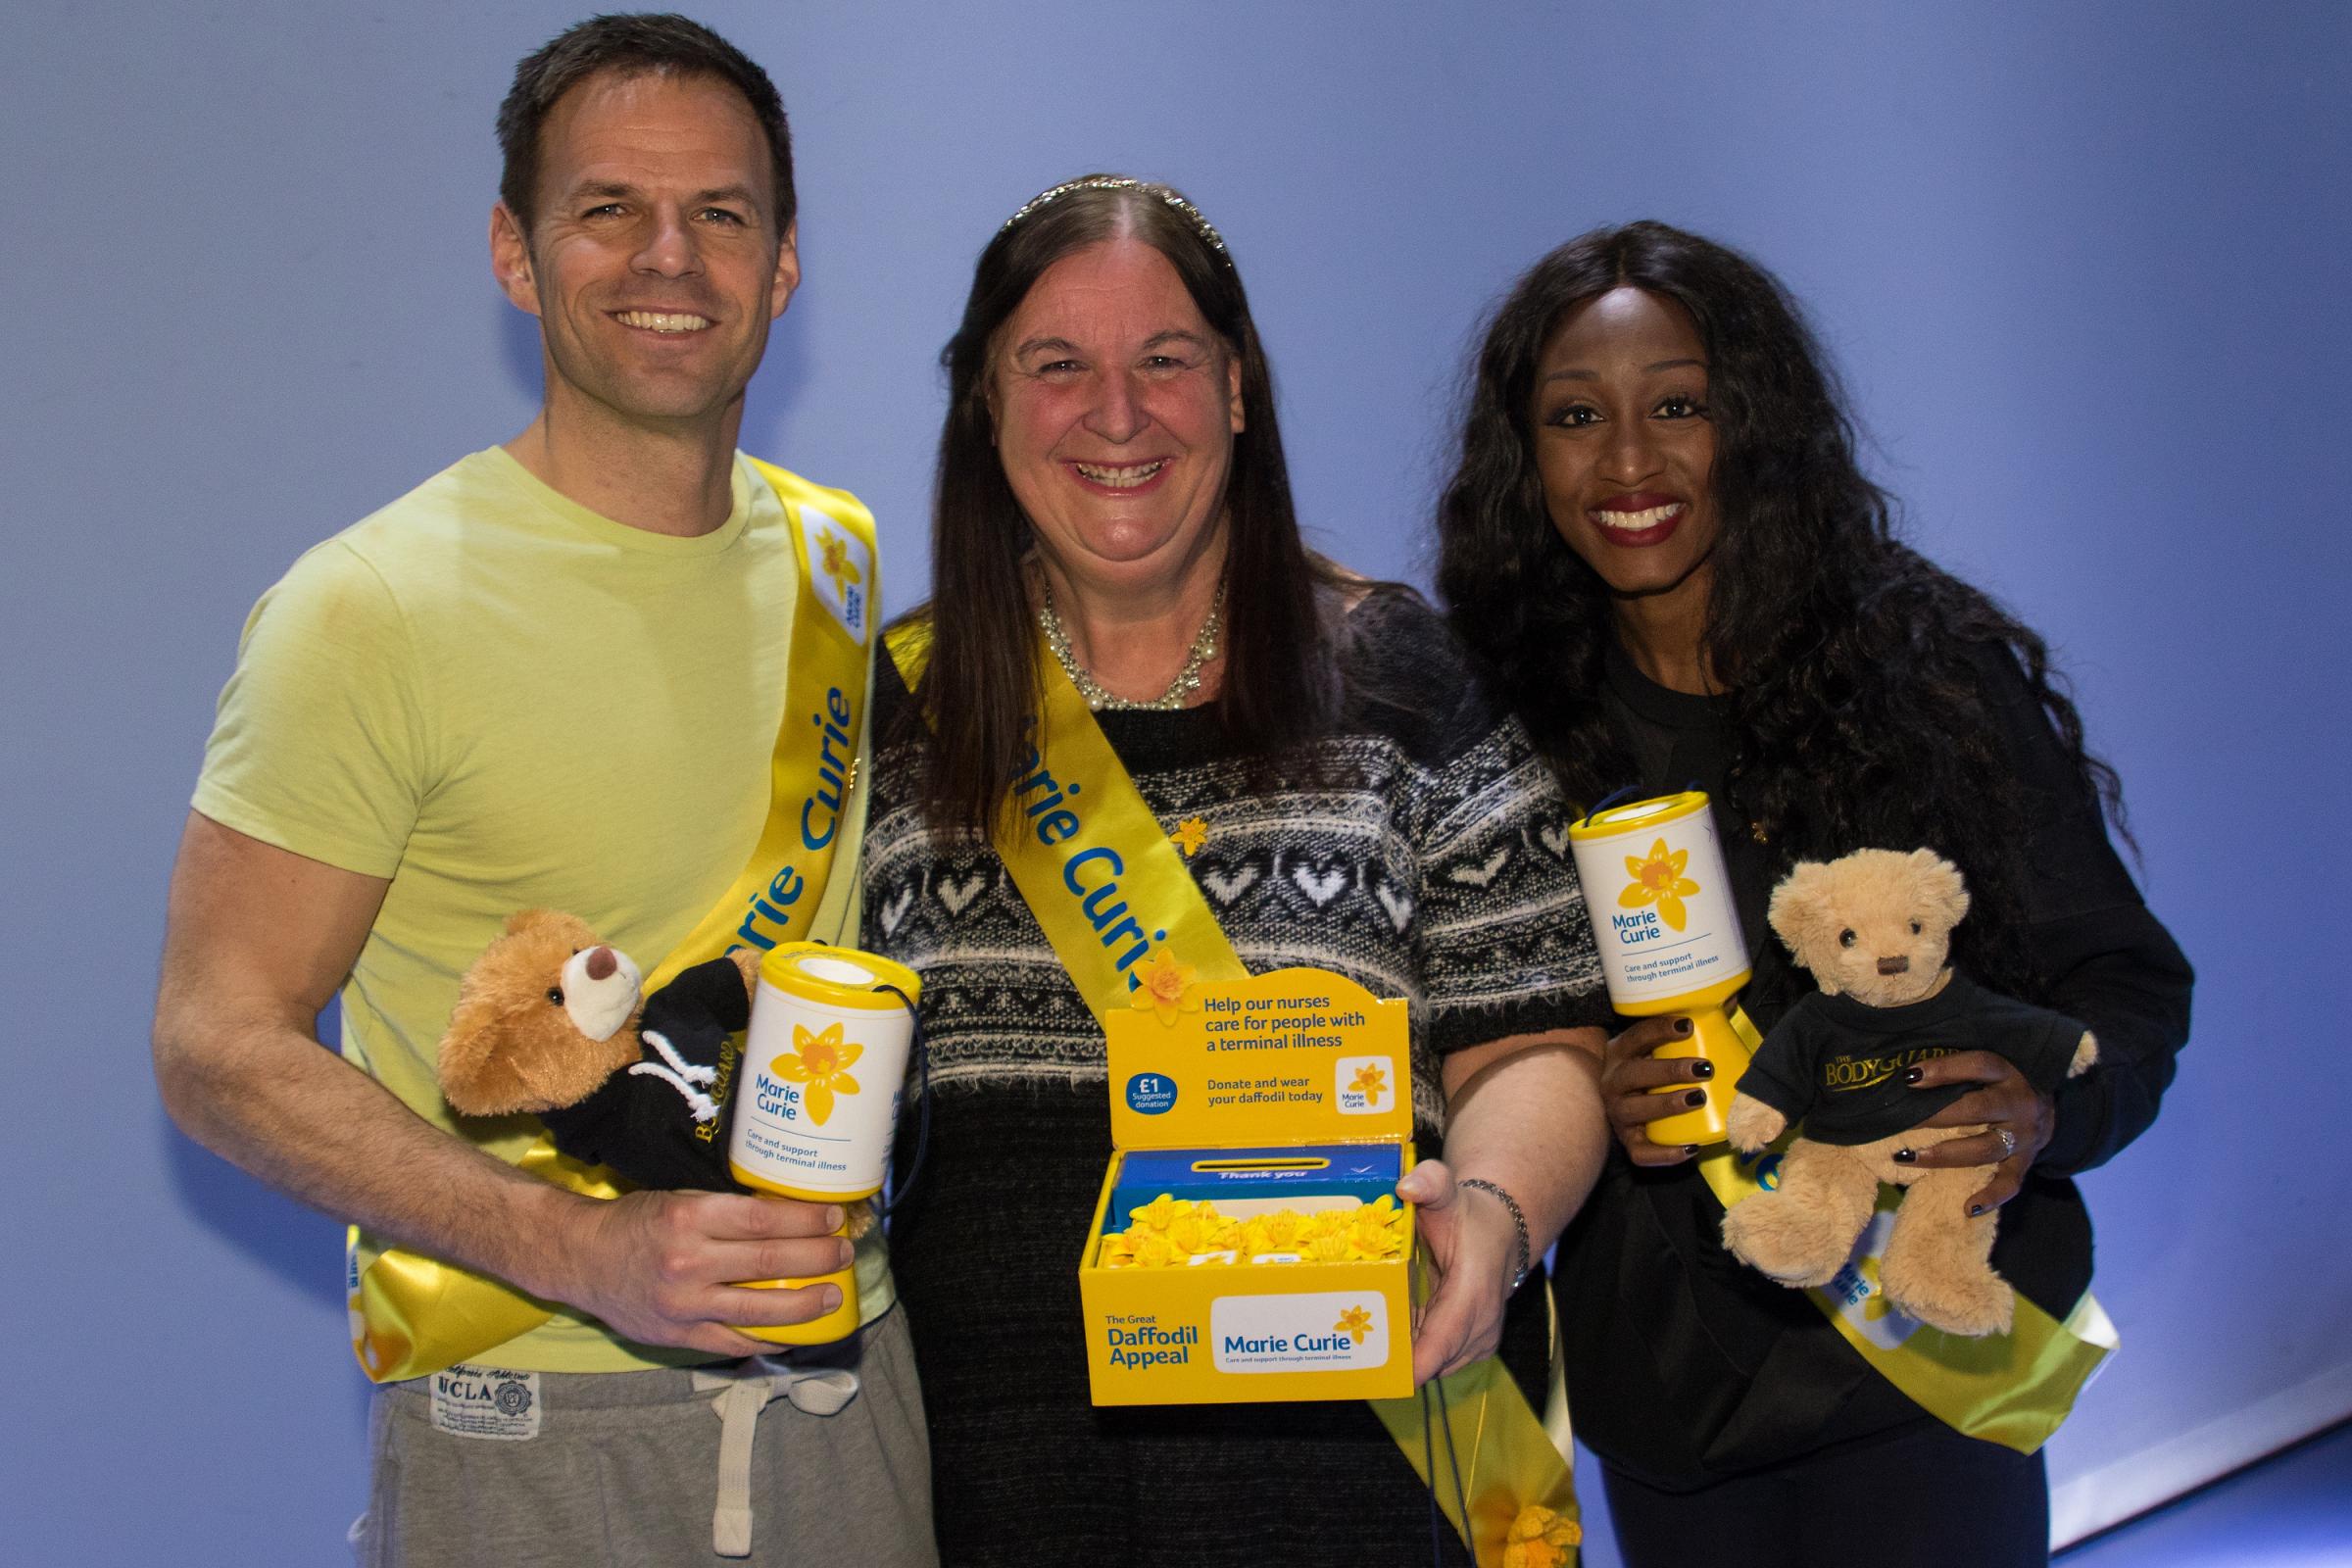 Stars of Bodyguard musical show support for Marie Curie’s Great Daffodil Appeal